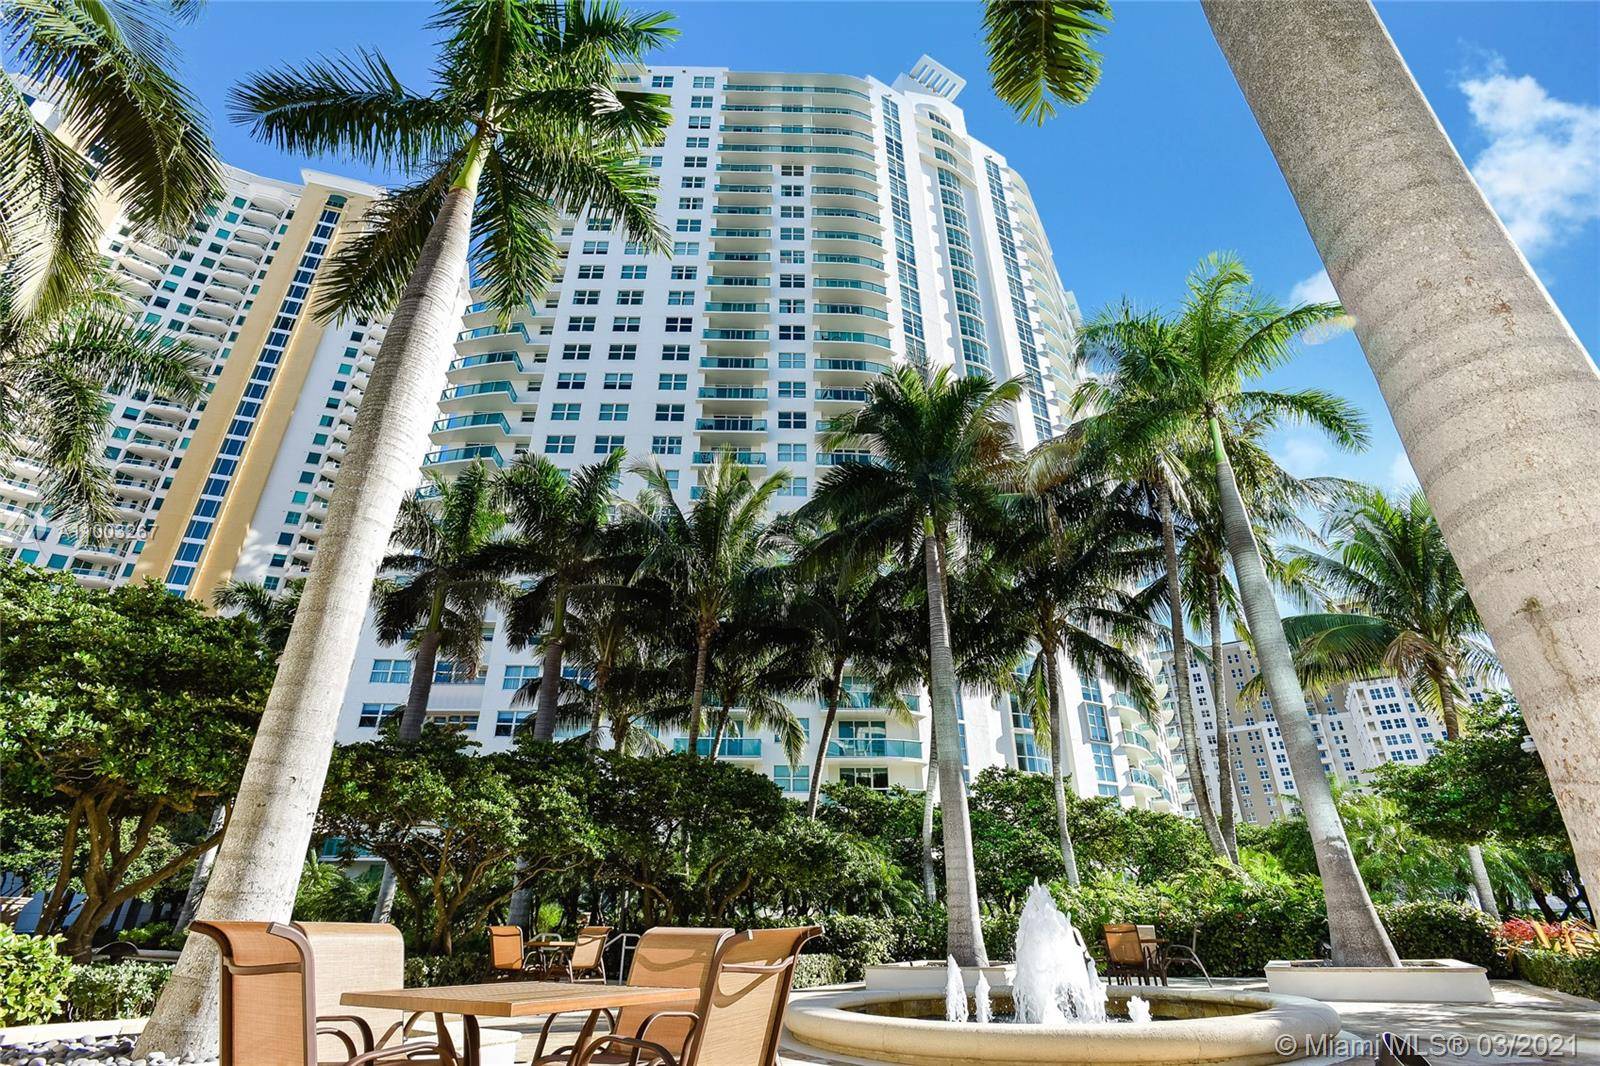 FT. Lauderdale Downtown living within walking distance to Las Olas Blvd, Broward Preforming Art Cultural Center, Museums, Universities, Financial District and Entertainment.